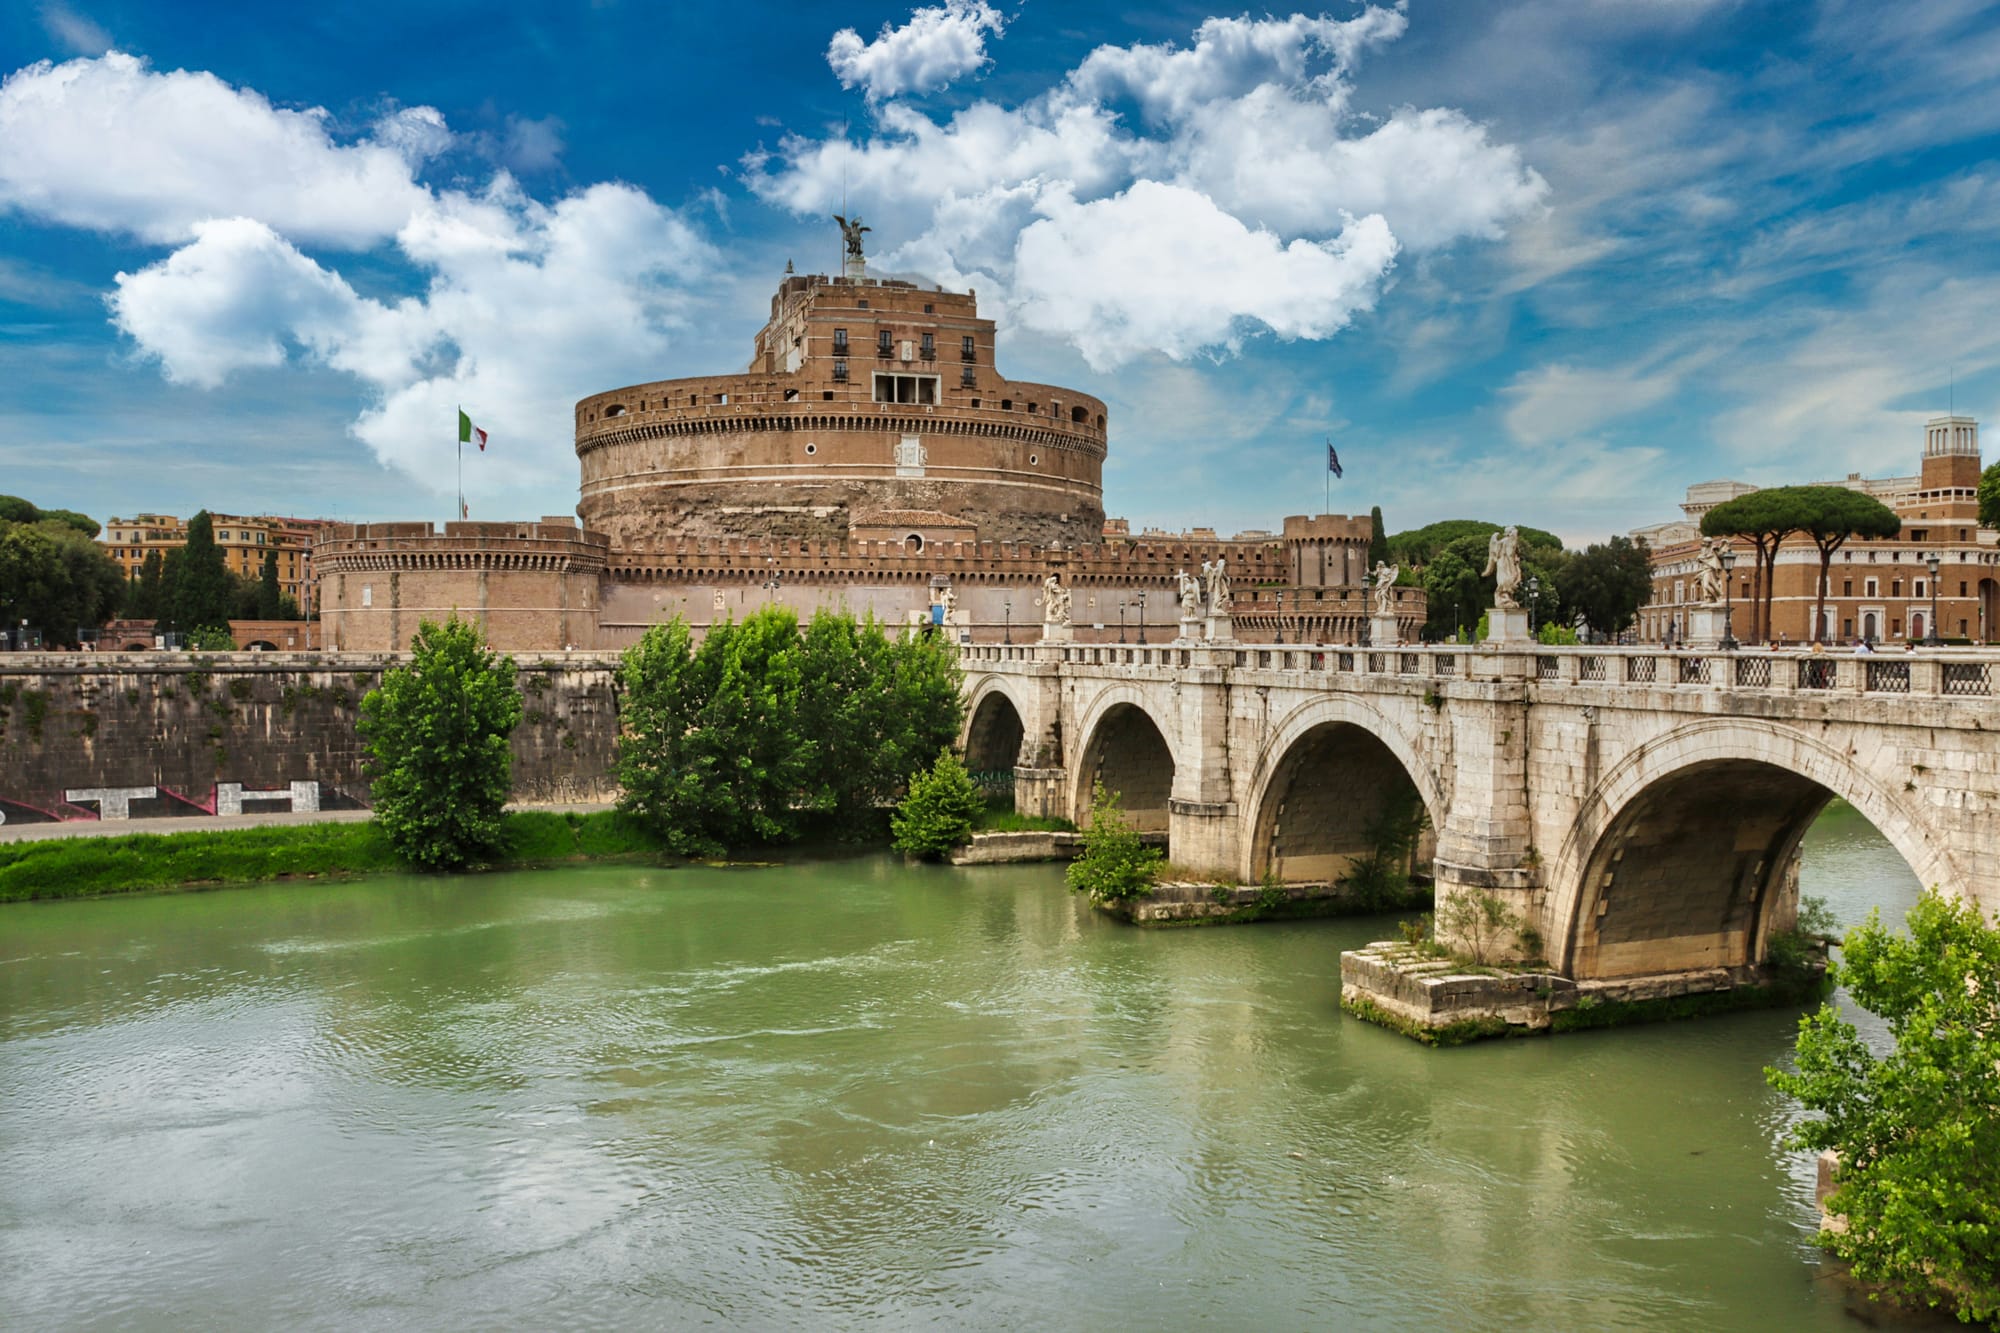 Castel Sant’Angelo - a wheelchair accessible fortress attraction in Rome